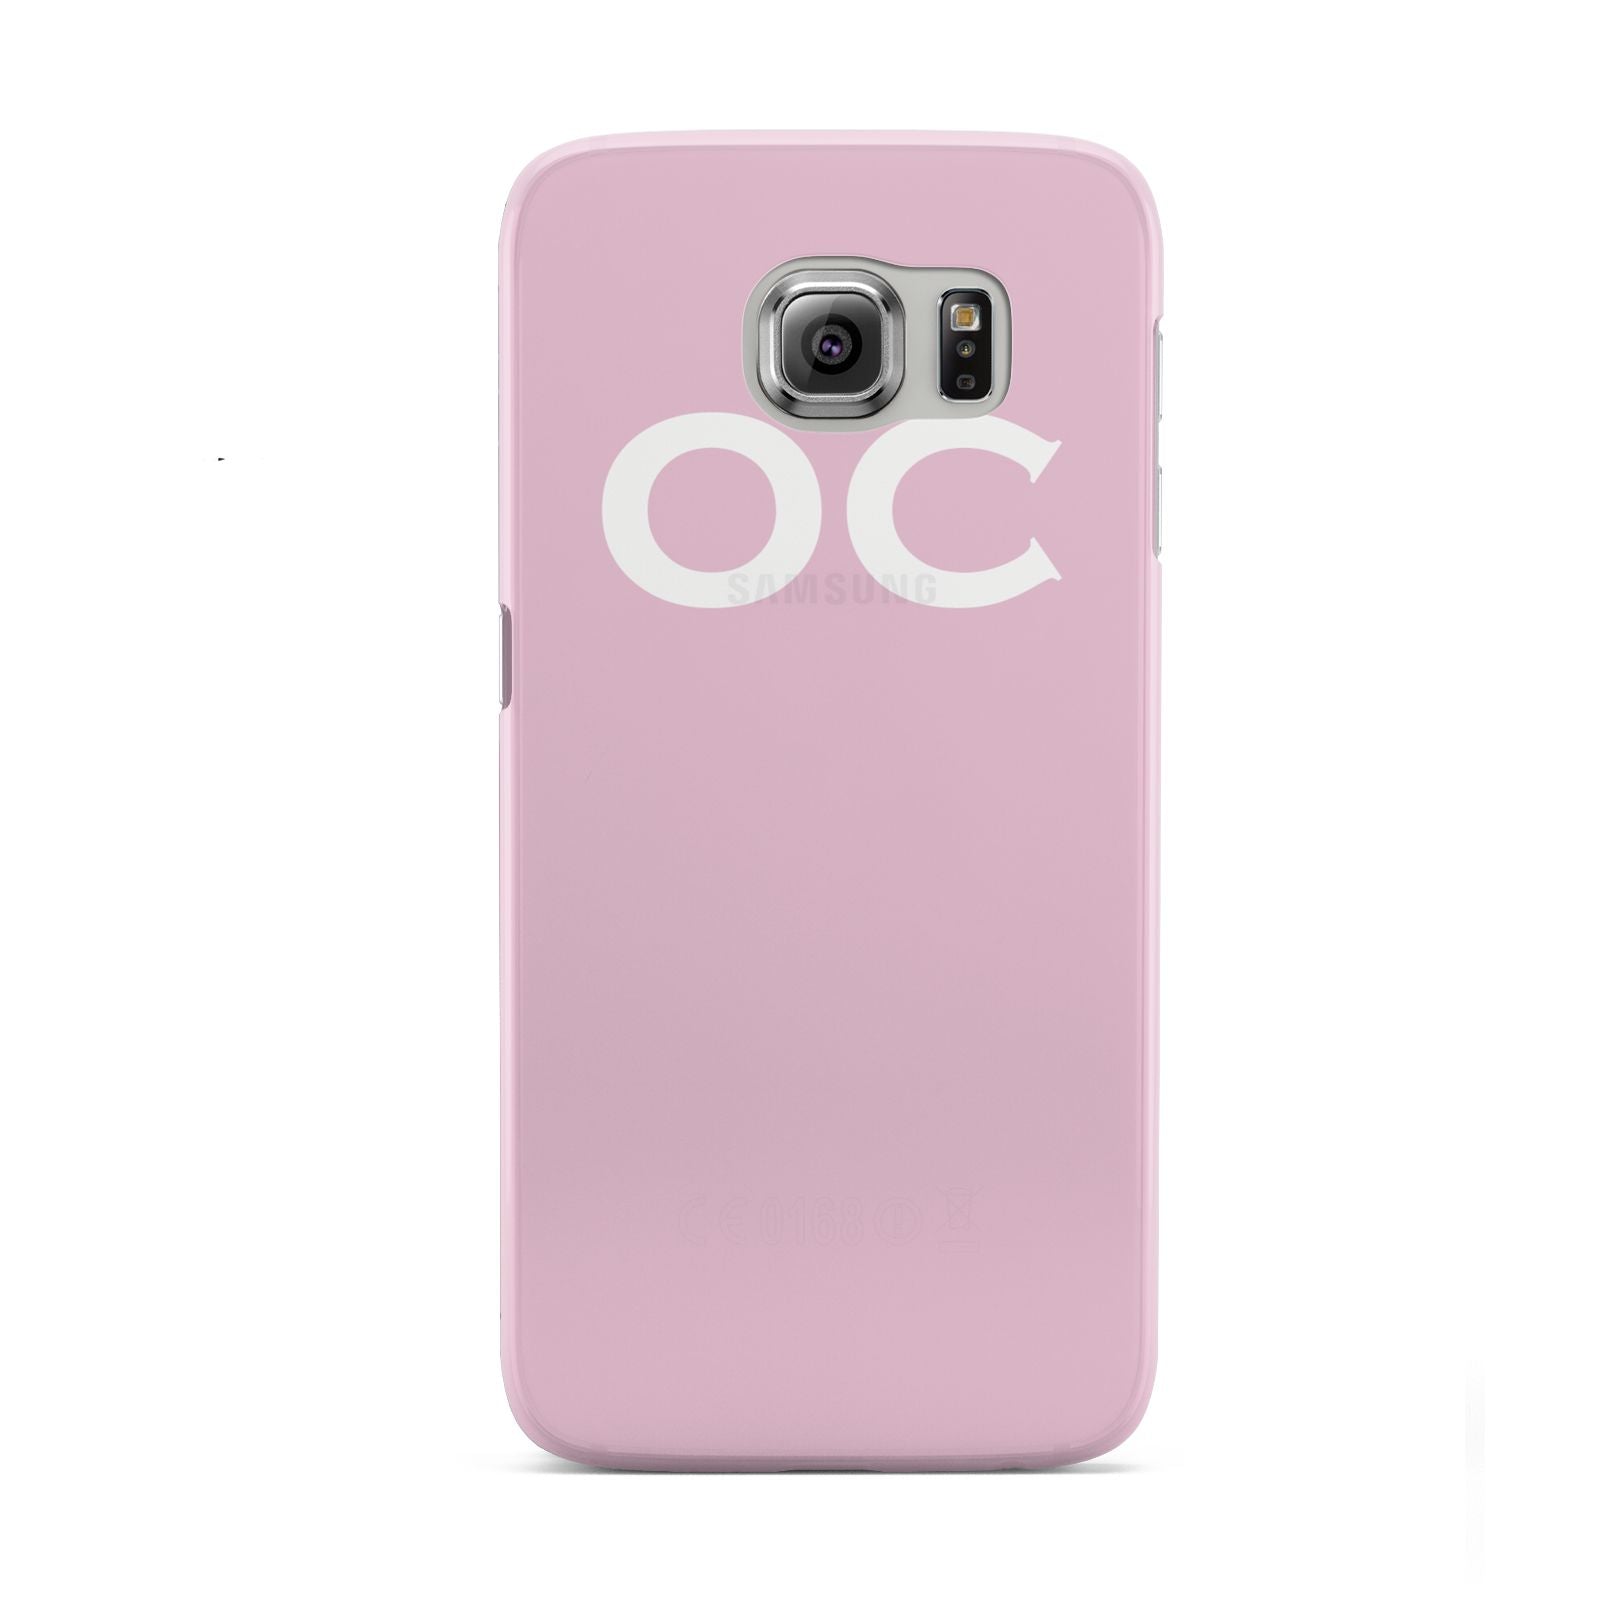 Personalised Initials 2 Samsung Galaxy S6 Case